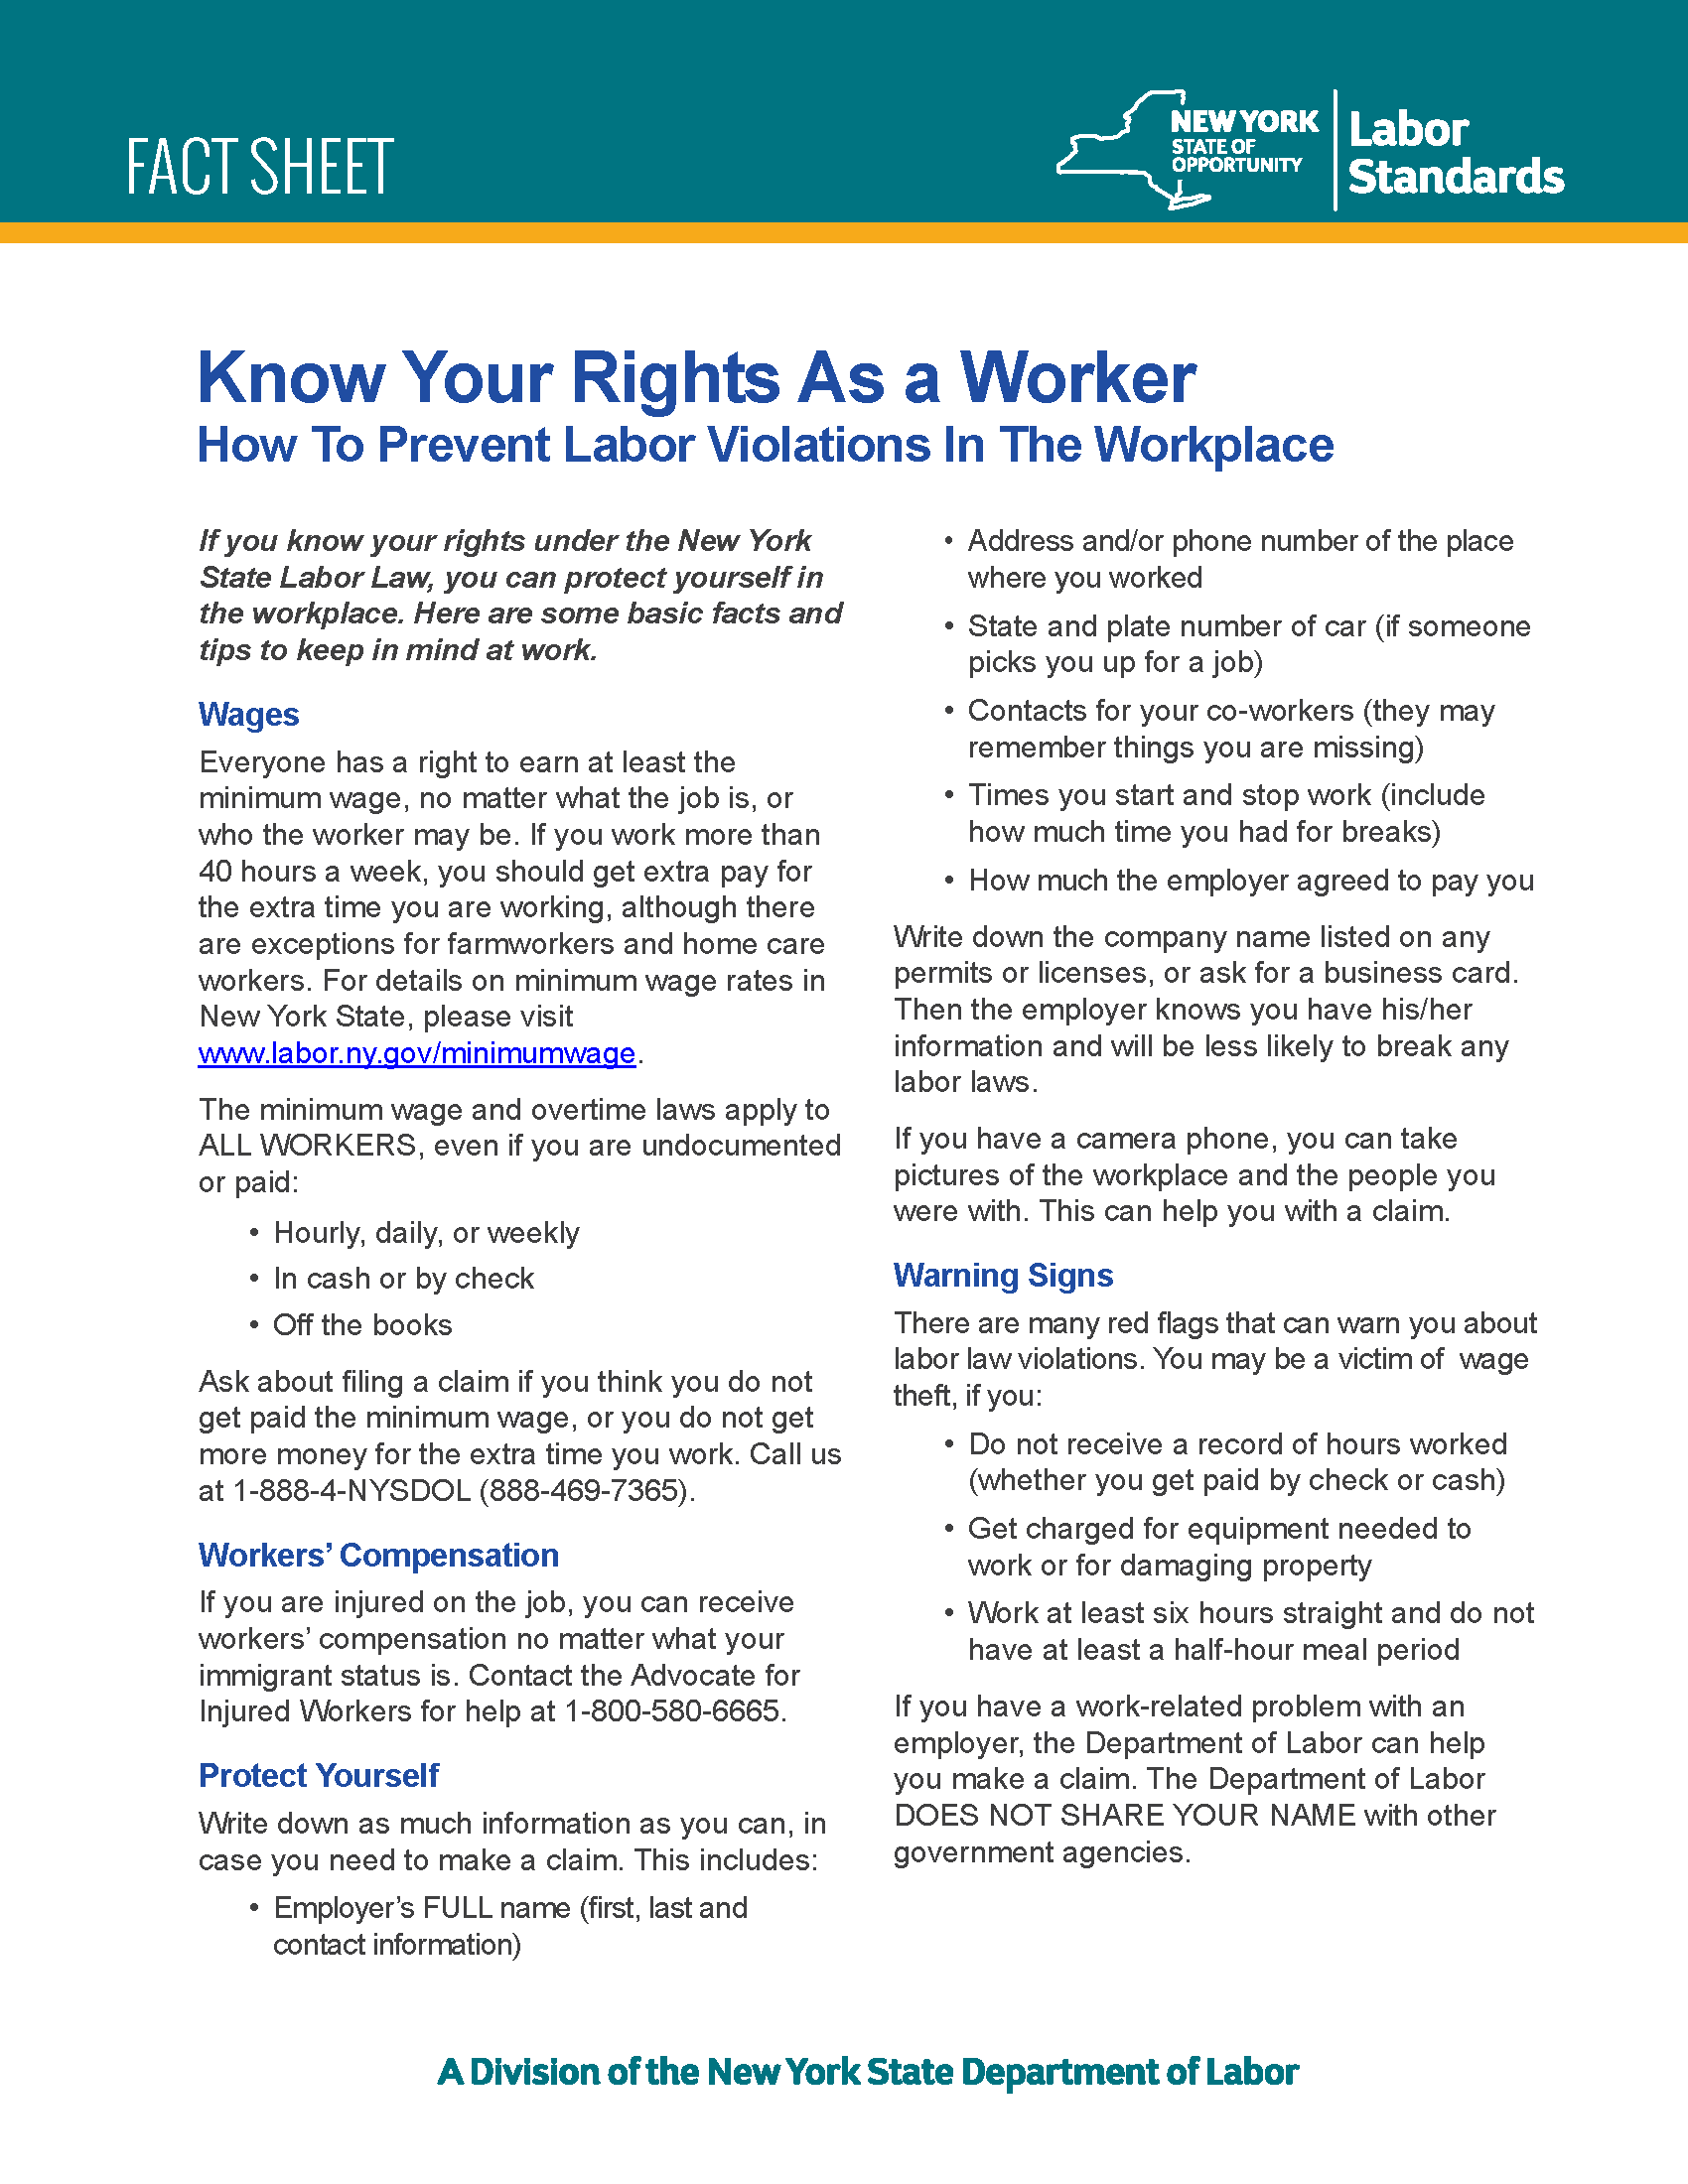 p711 Know your rights as a worker_Page_1 Opens in new window